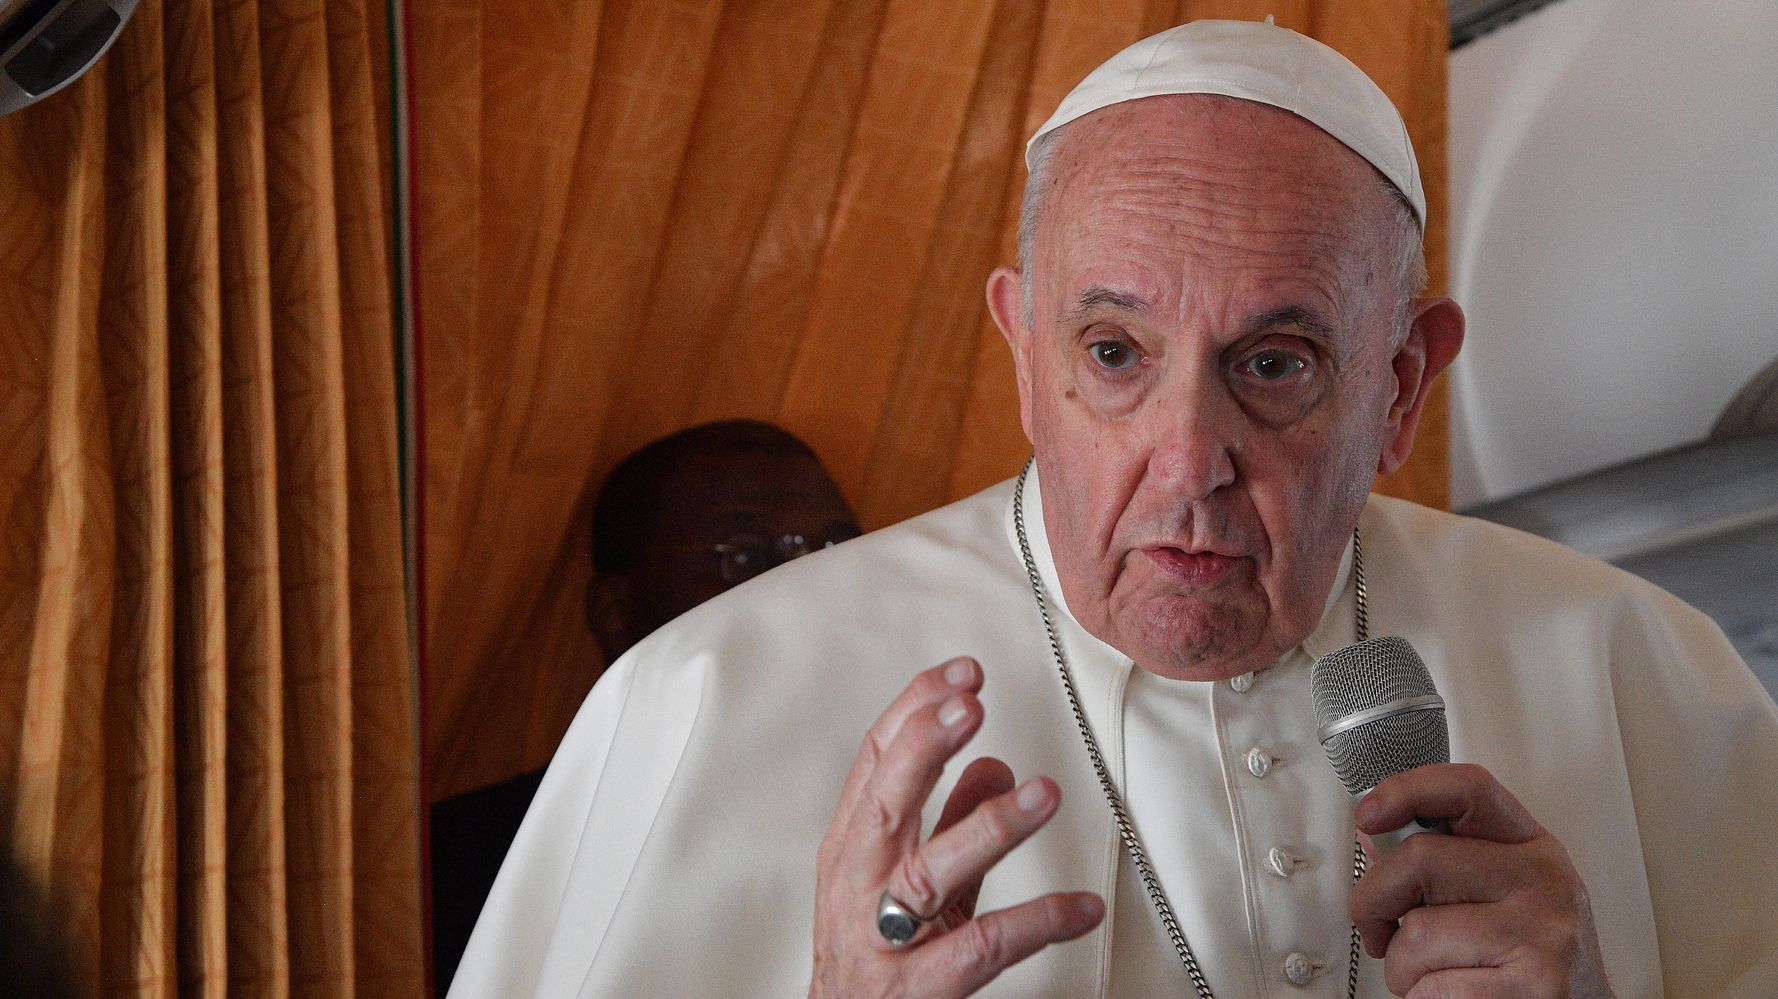 Pope Francis Confused Why People Refuse To Take COVID-19 Vaccines